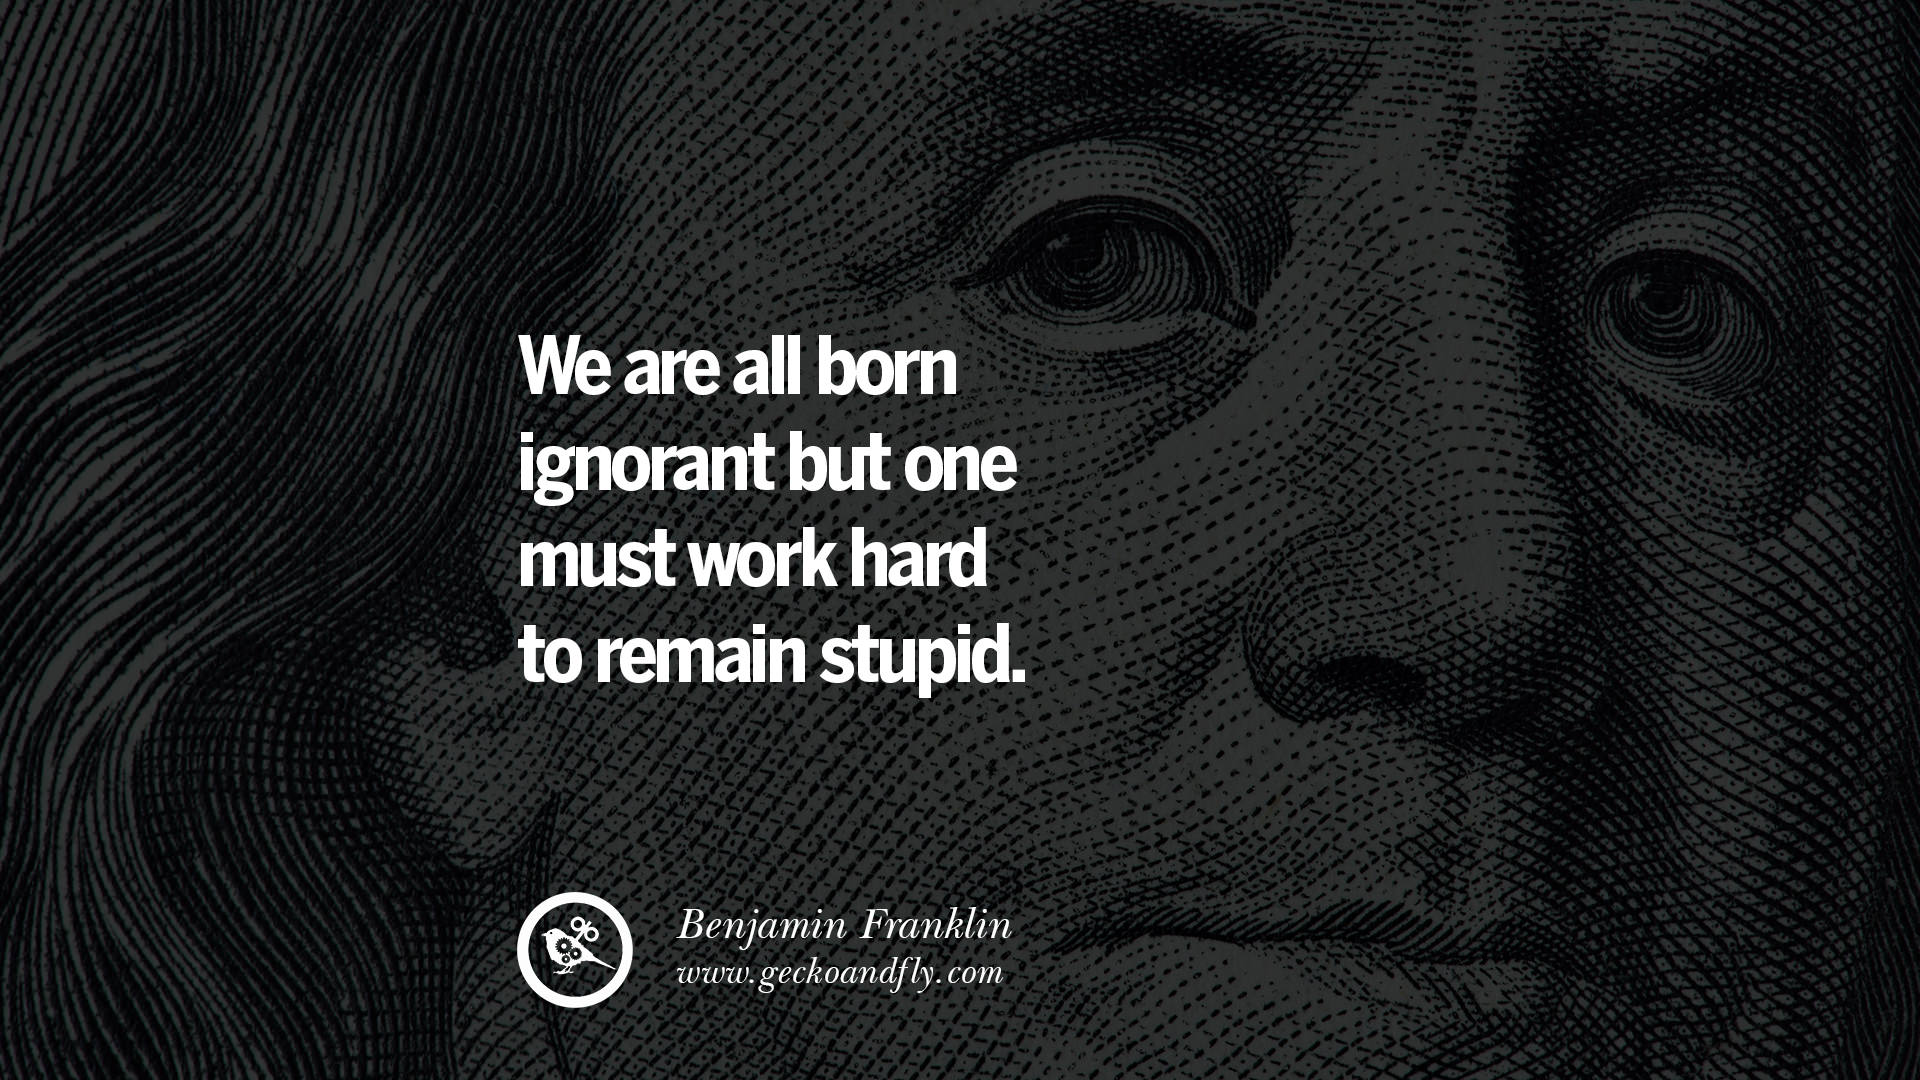 40 Famous Benjamin Franklin Quotes on Knowledge 